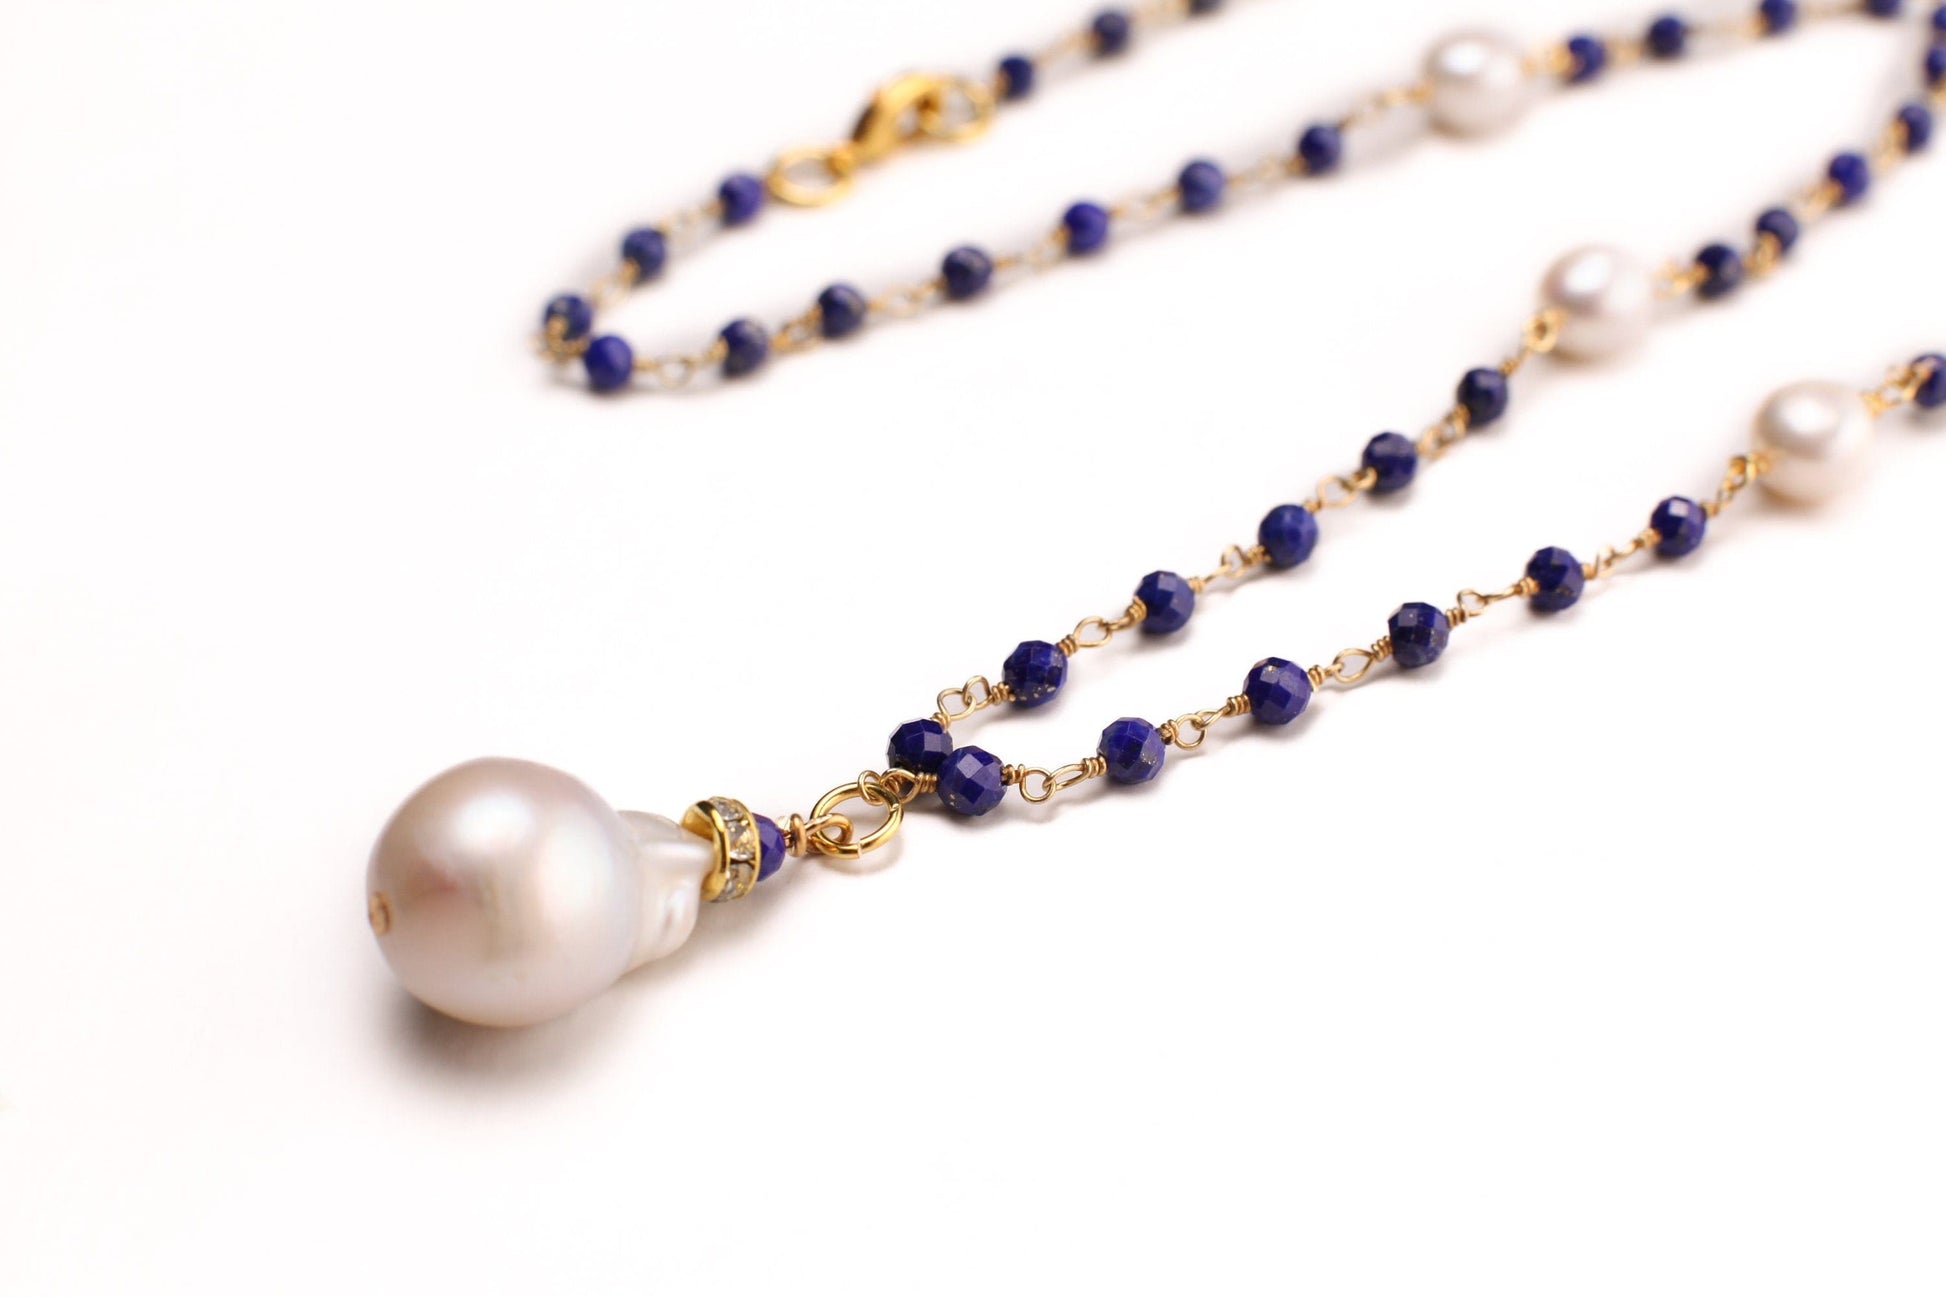 Lapis Lazuli 3mm Faceted Chain, Dangling Freshwater Baroque Pearl Pendant, Spacer 7mm Freshwater Potato Pearl Gold Elegant Necklace, gift